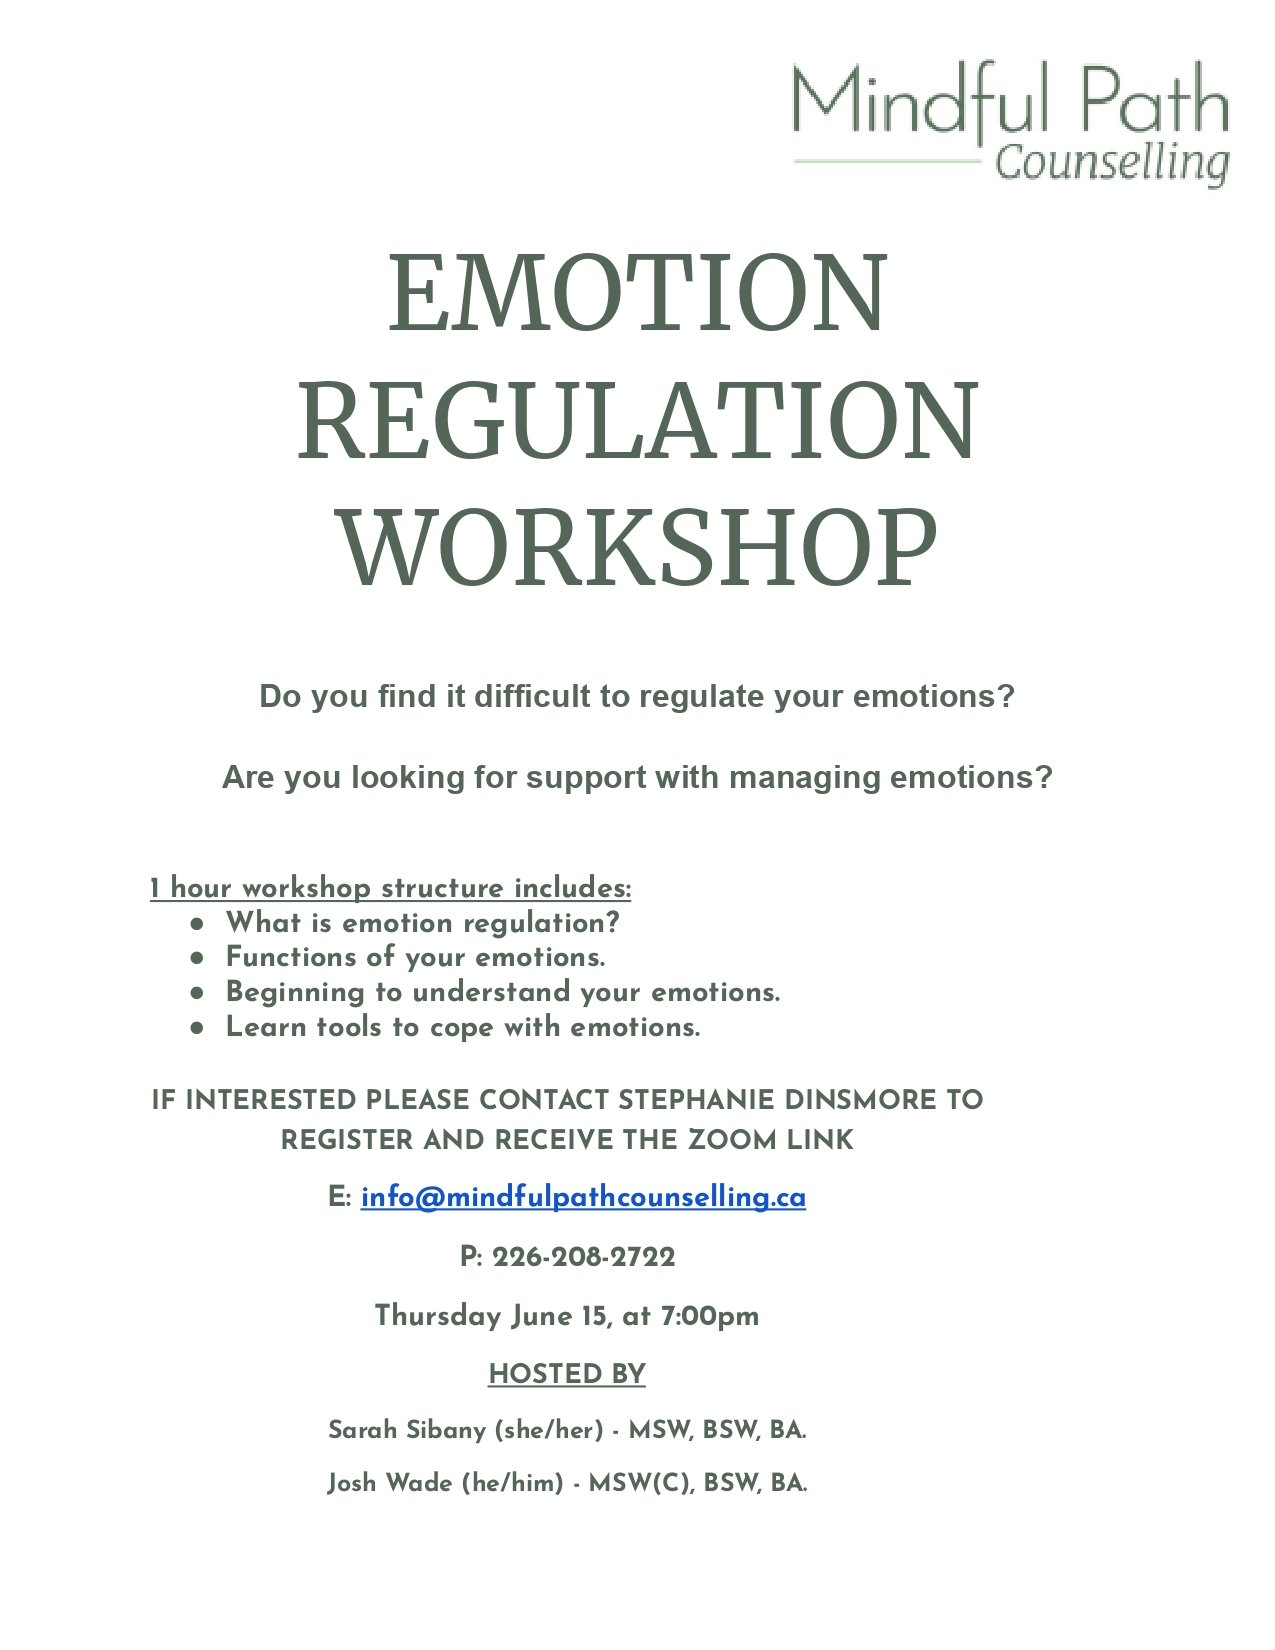 Emotion Regulation Workshop hosted by Sarah Sibany MSW RSW and Josh Wade MSW (c) on June 15th, 2023 at 7:00 pm email info@mindfulpathcounselling.ca to register